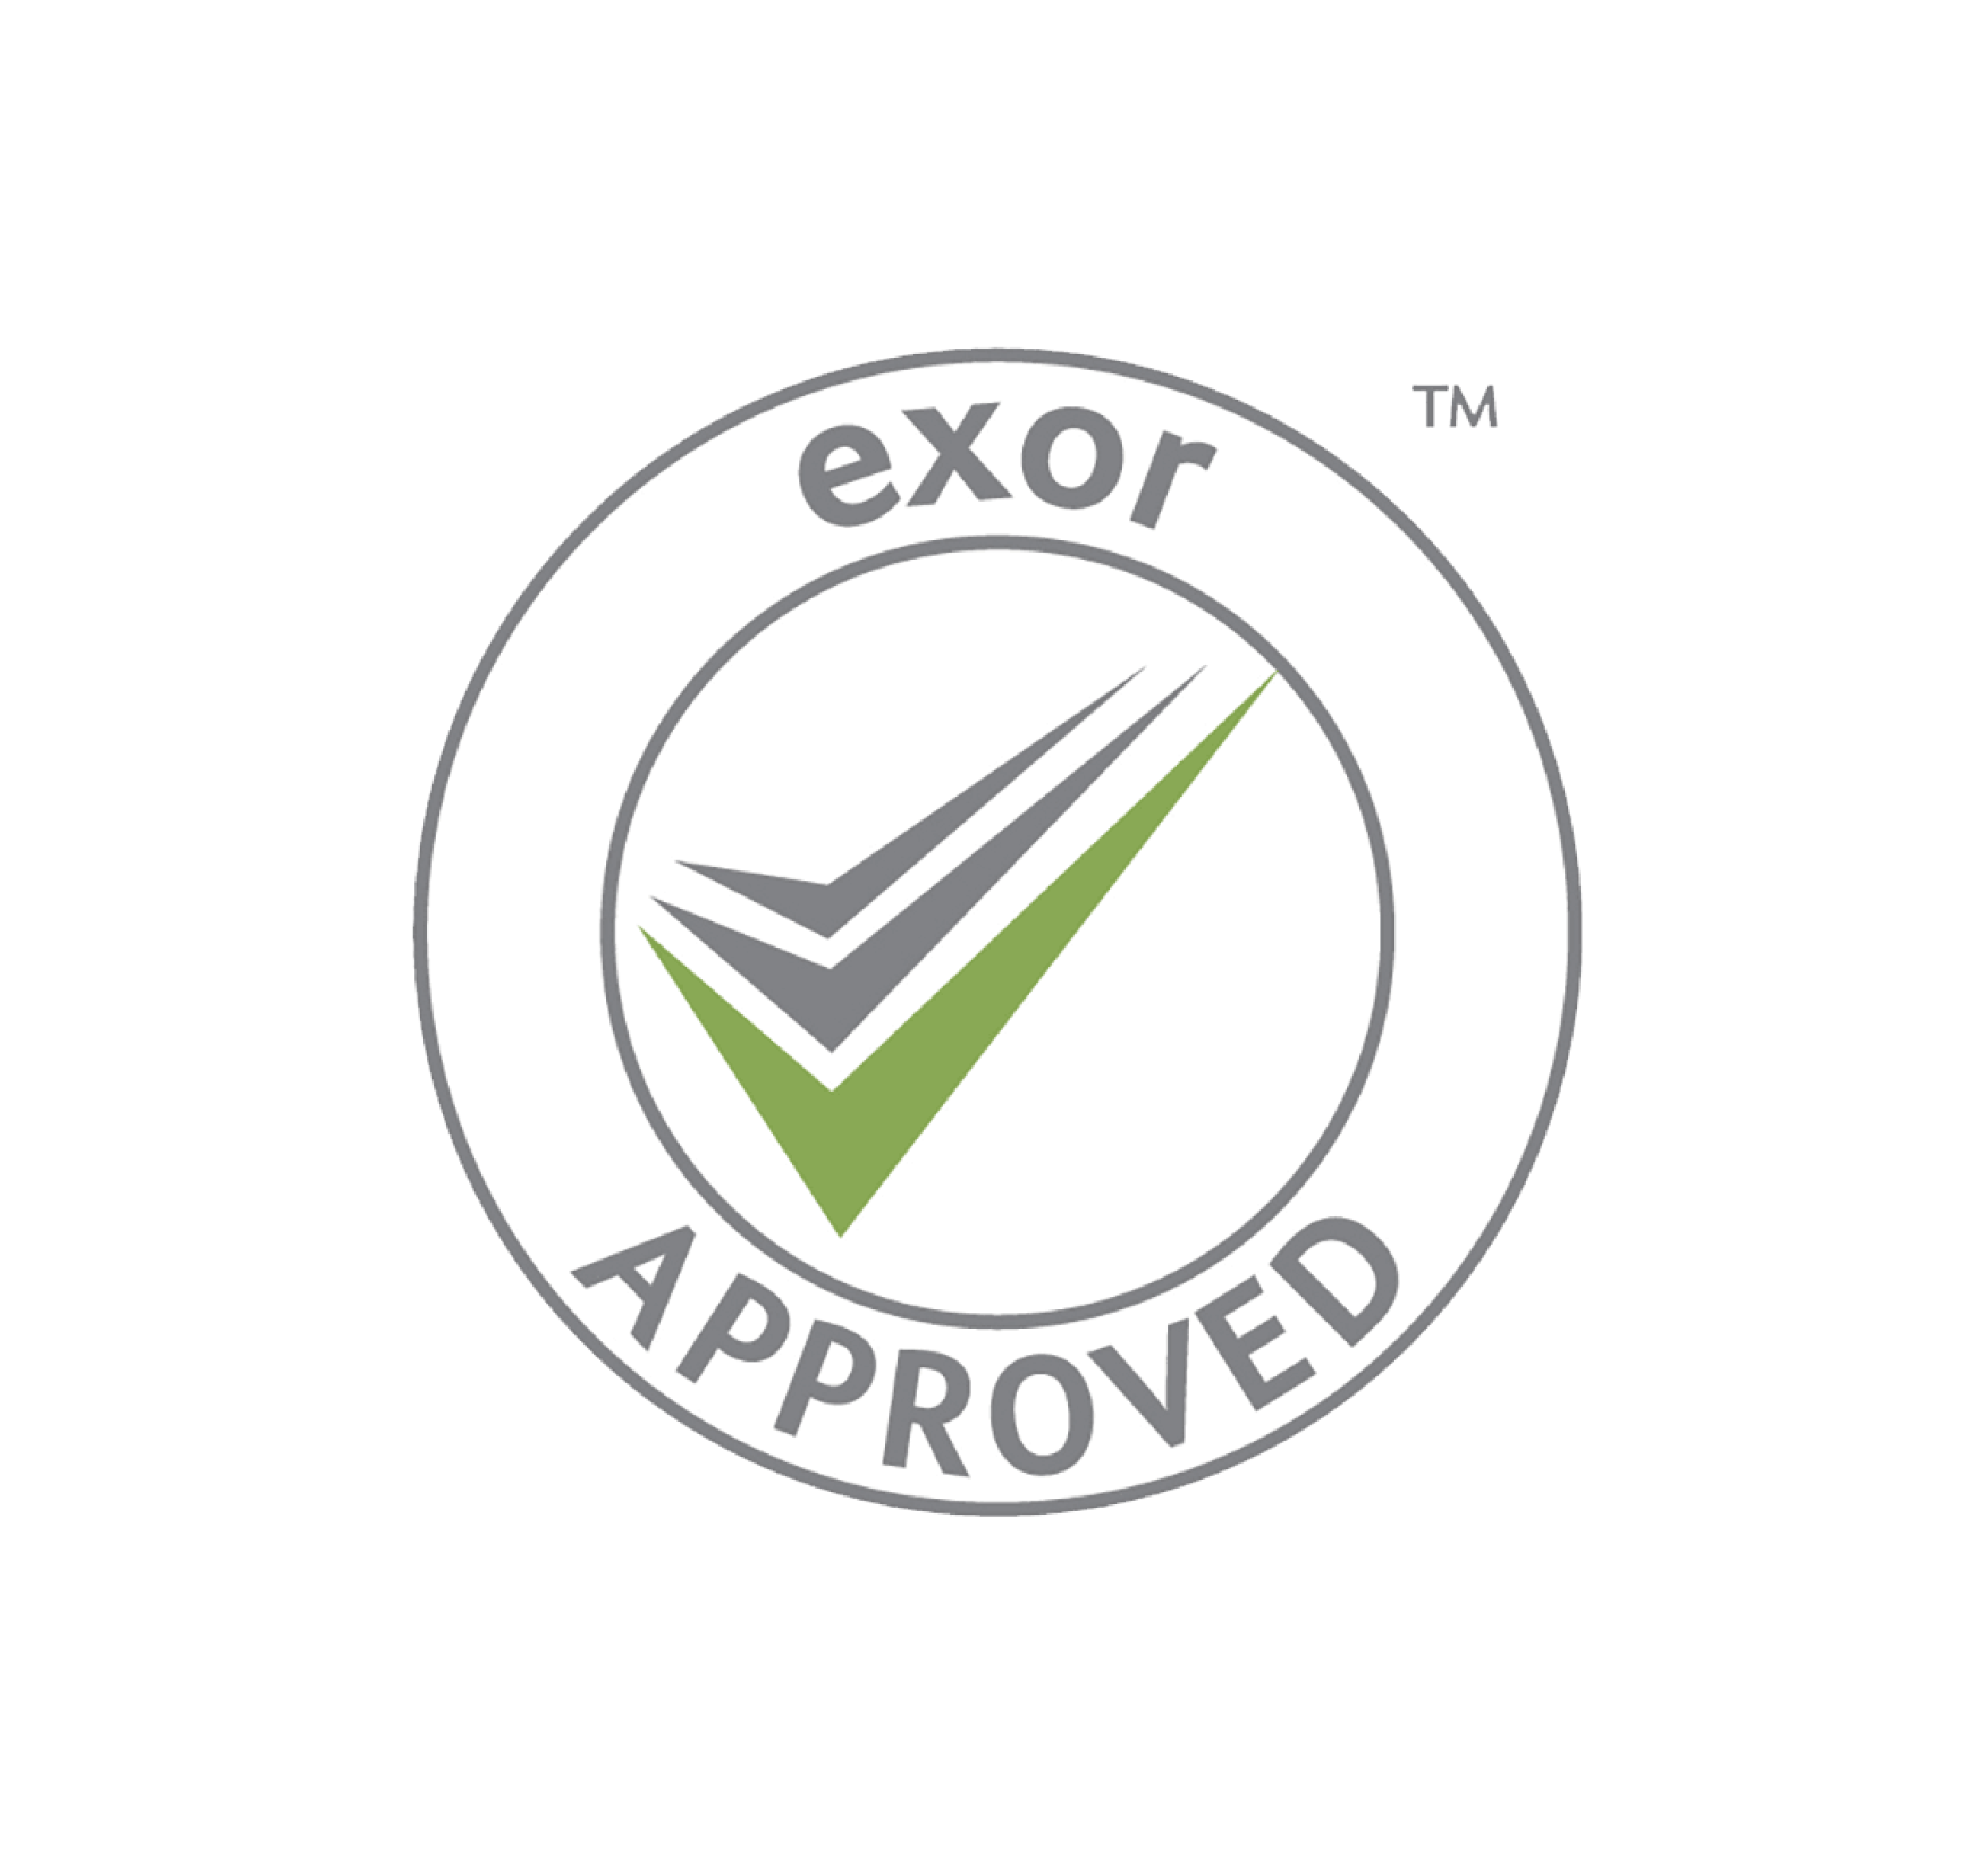 exorapproved-01 (white background).png